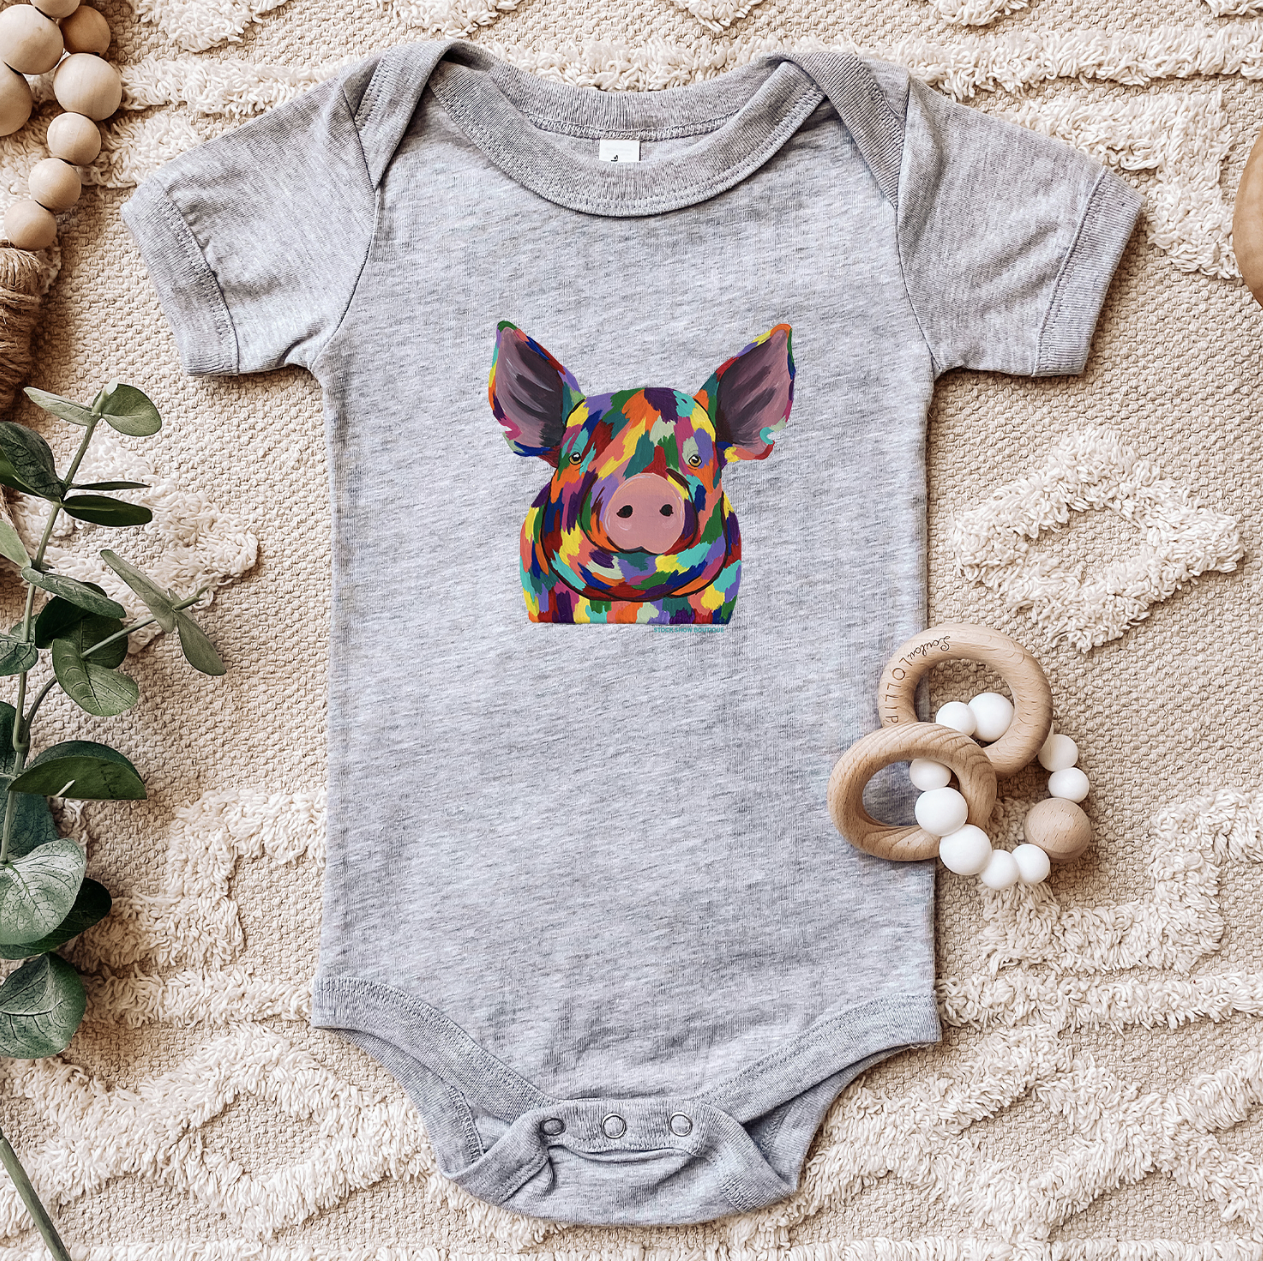 Rainbow Pig One Piece/T-Shirt (Newborn - Youth XL) - Multiple Colors!